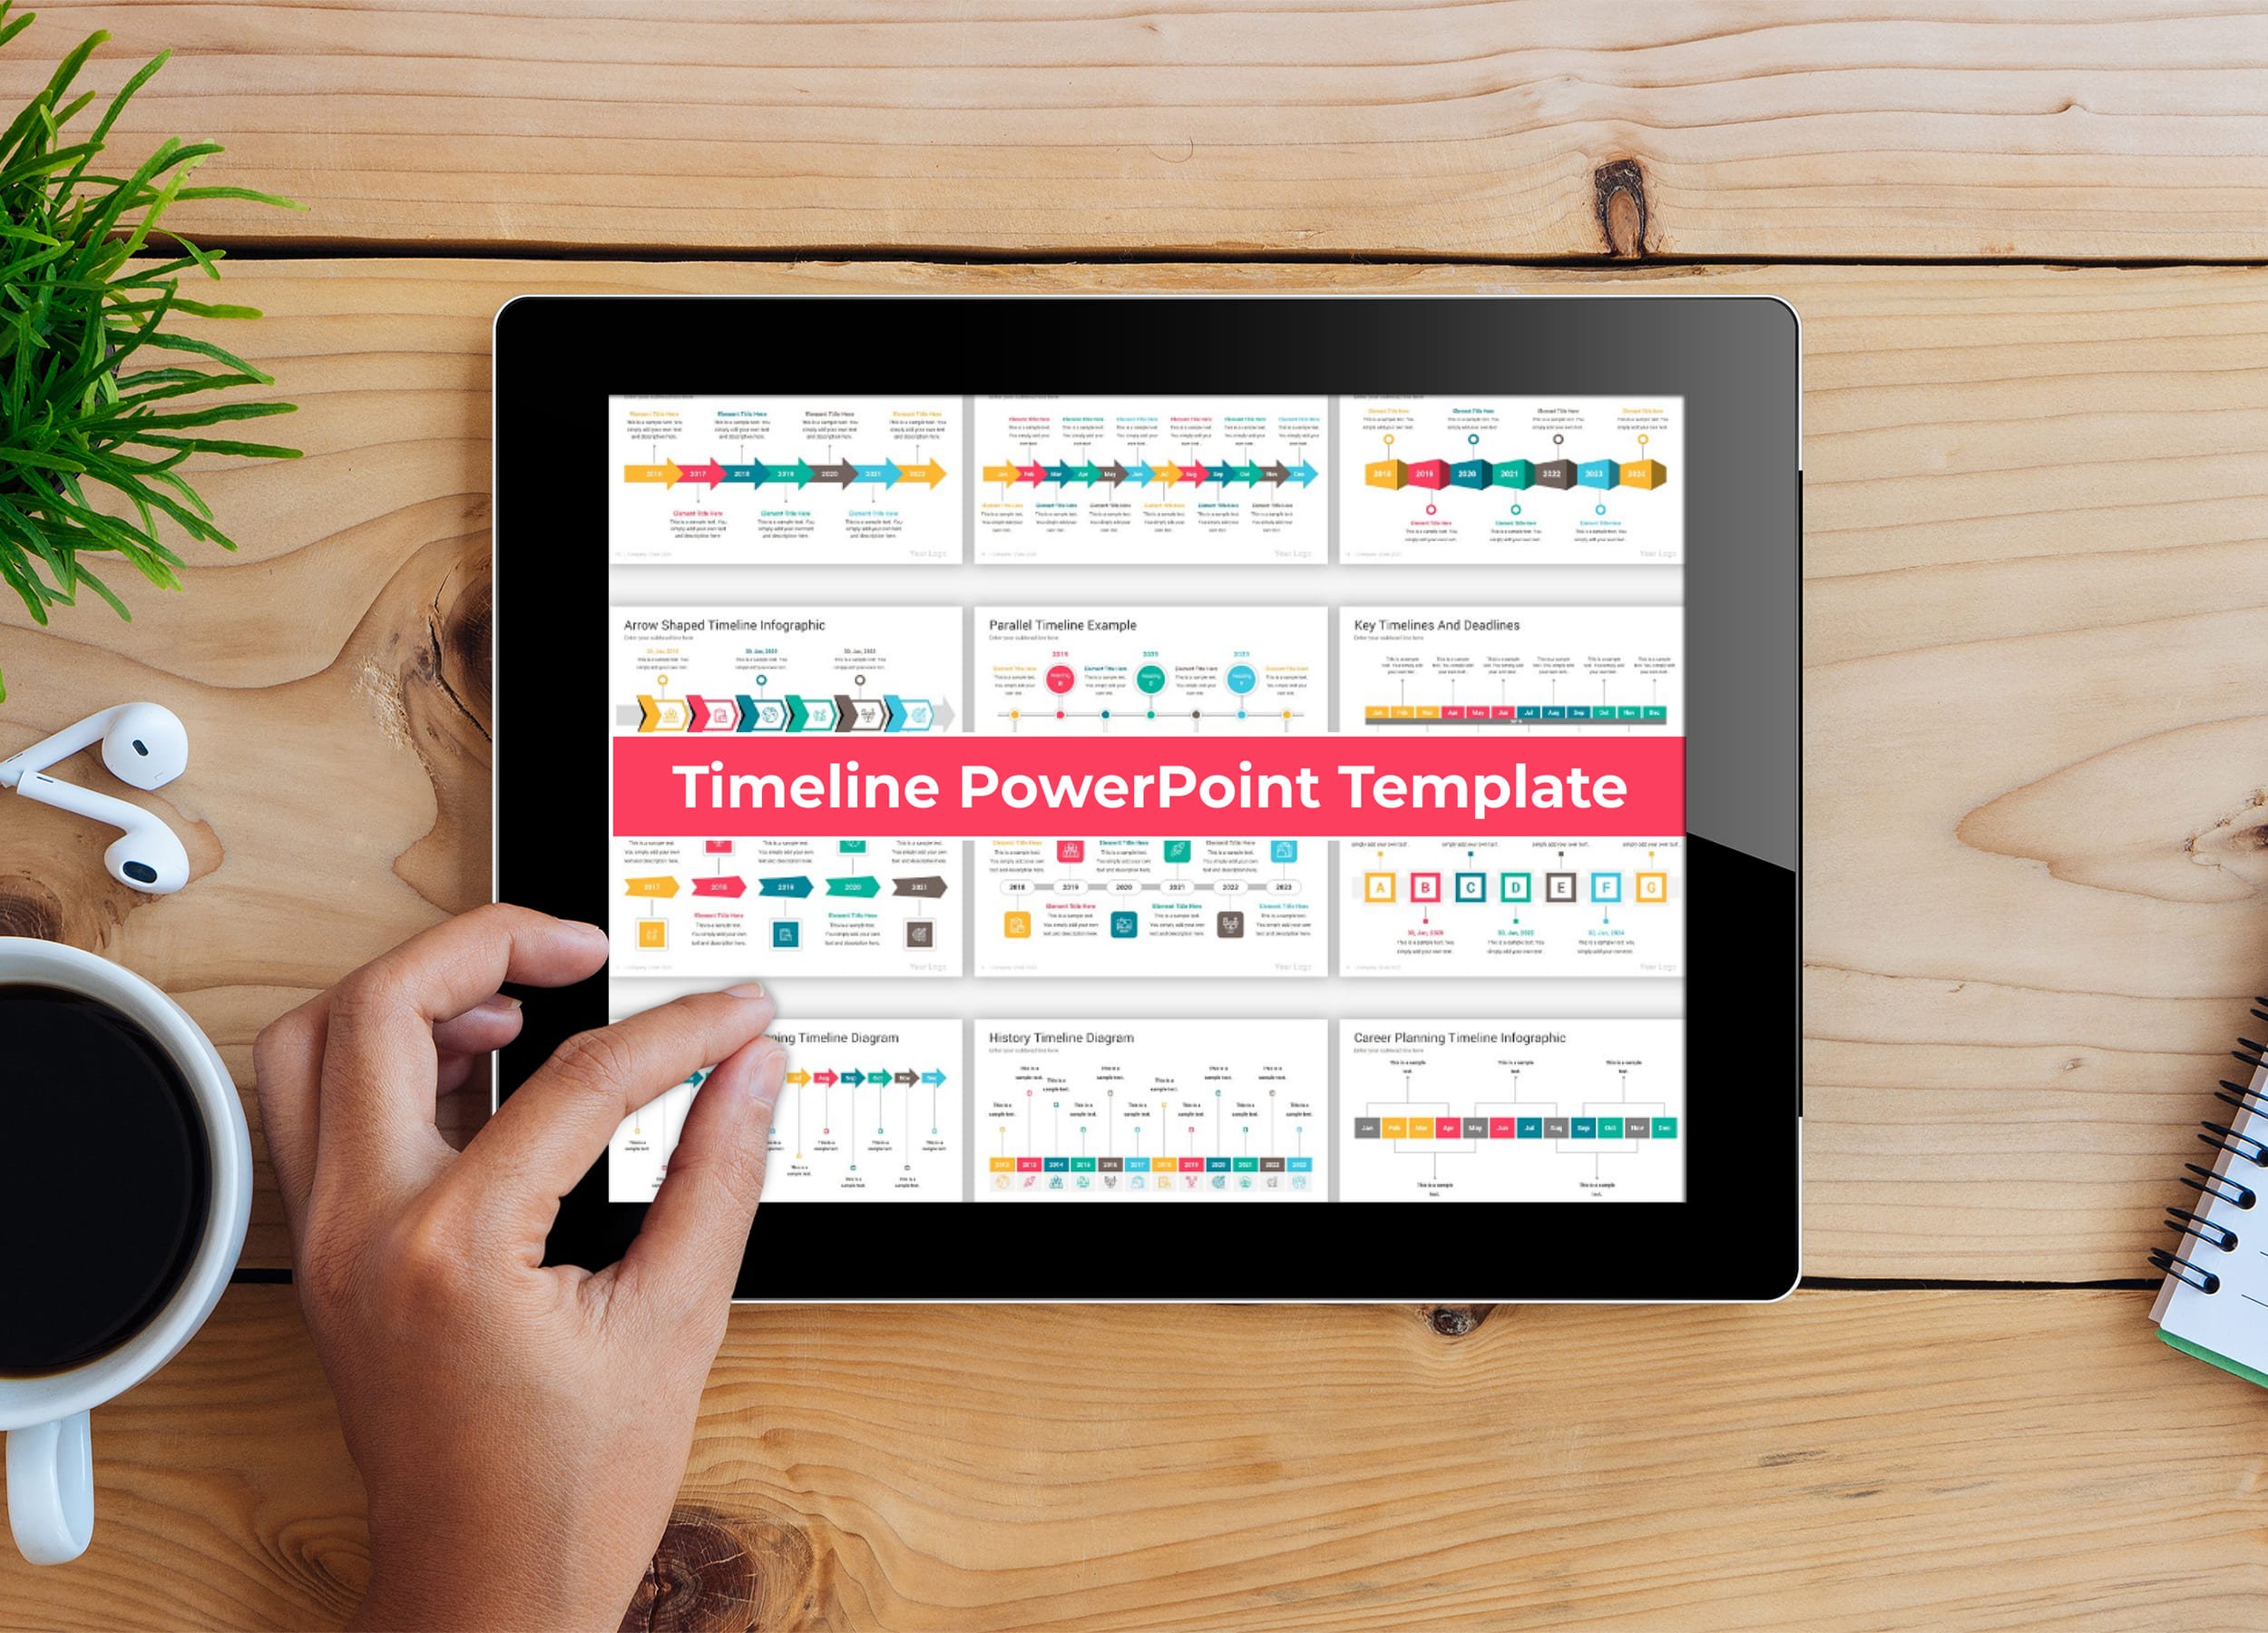 Tablet option of the Timeline PowerPoint Template.